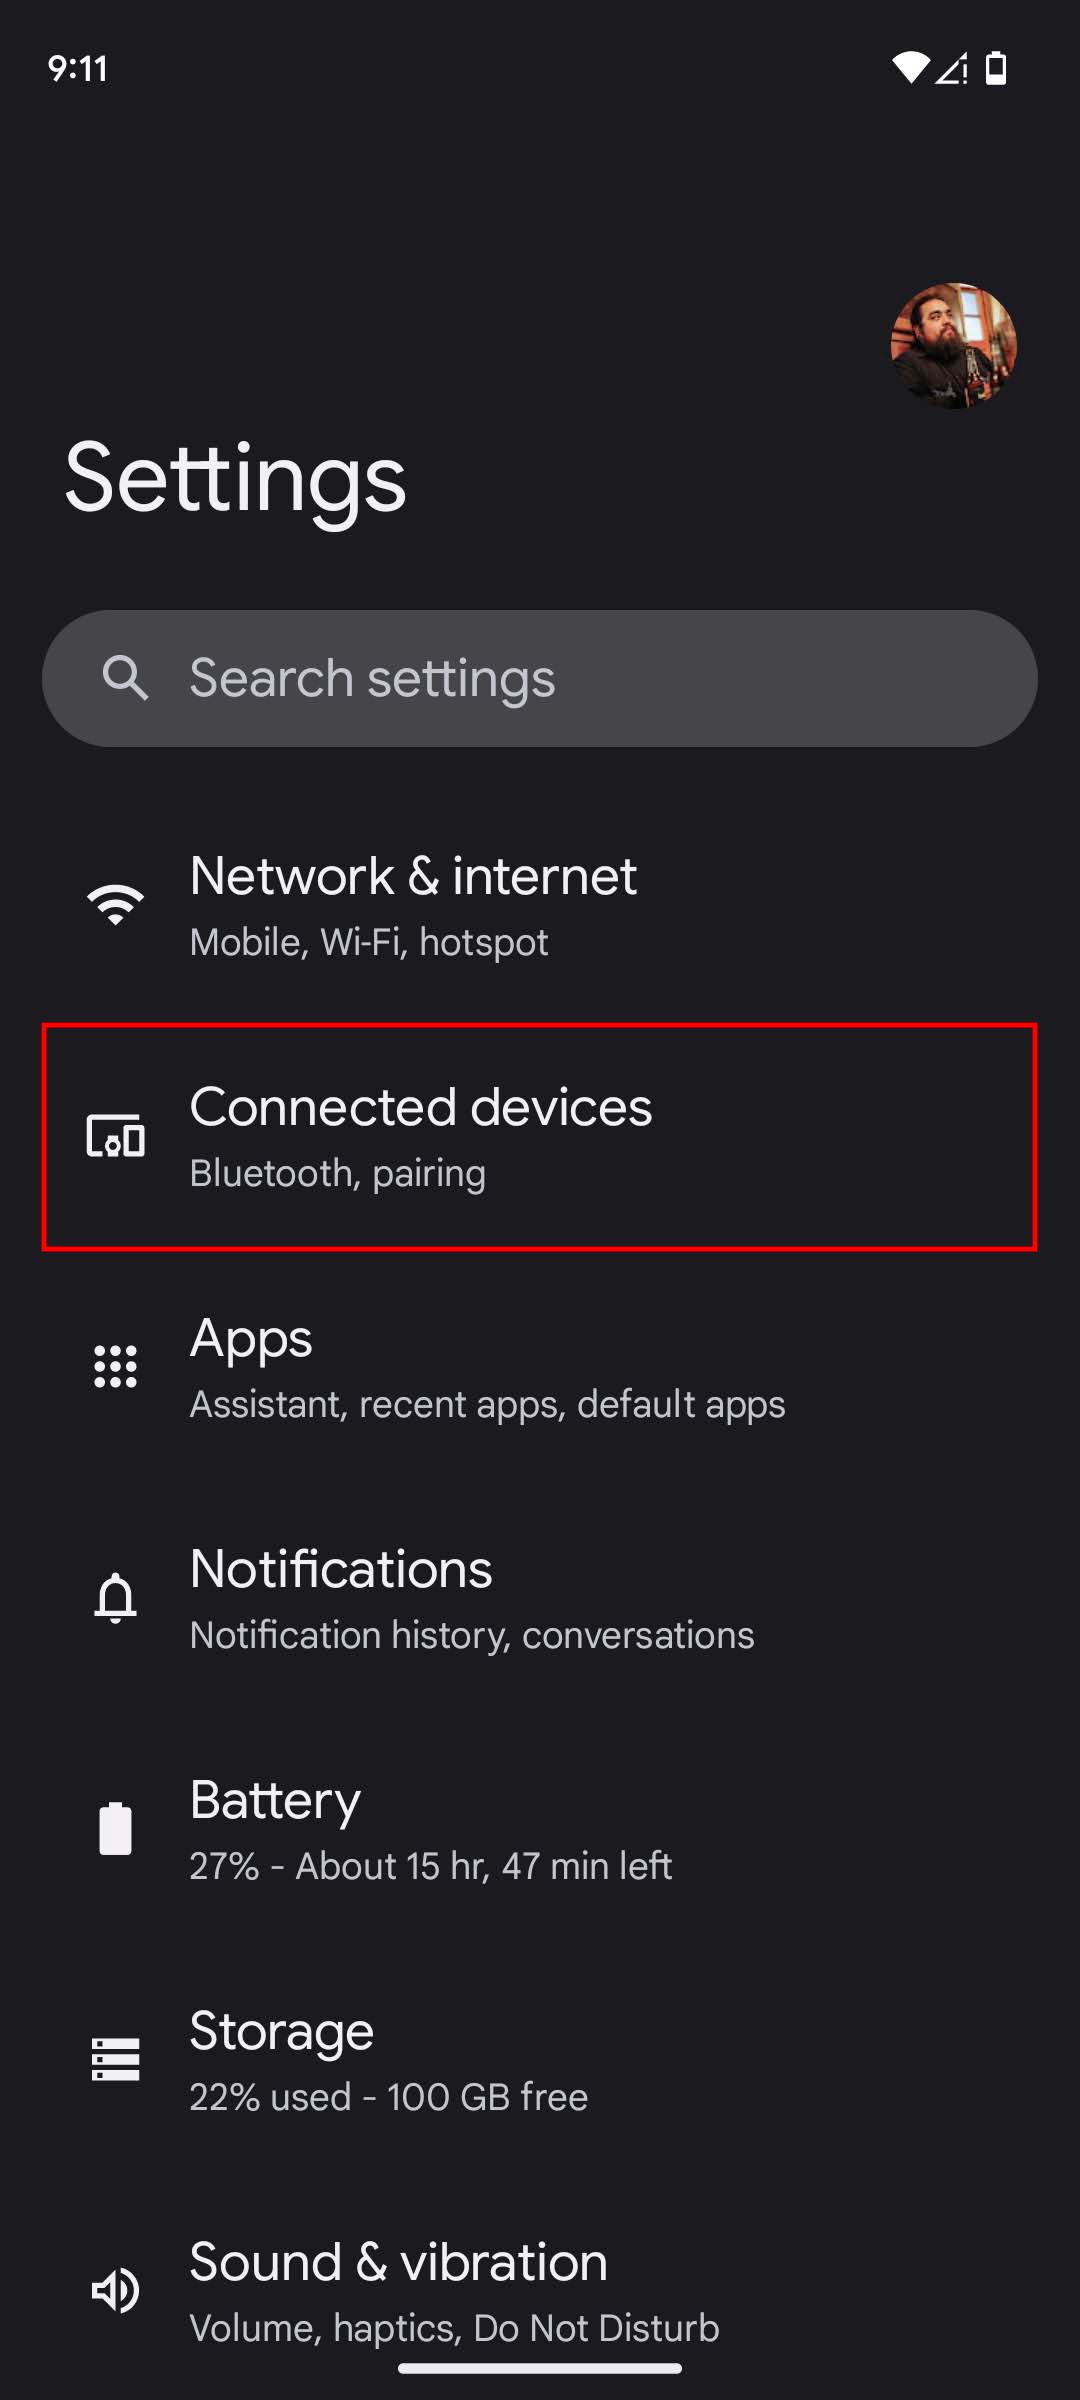 Open the settings on your connected device.
Navigate to the "Apps" or "Applications" section.